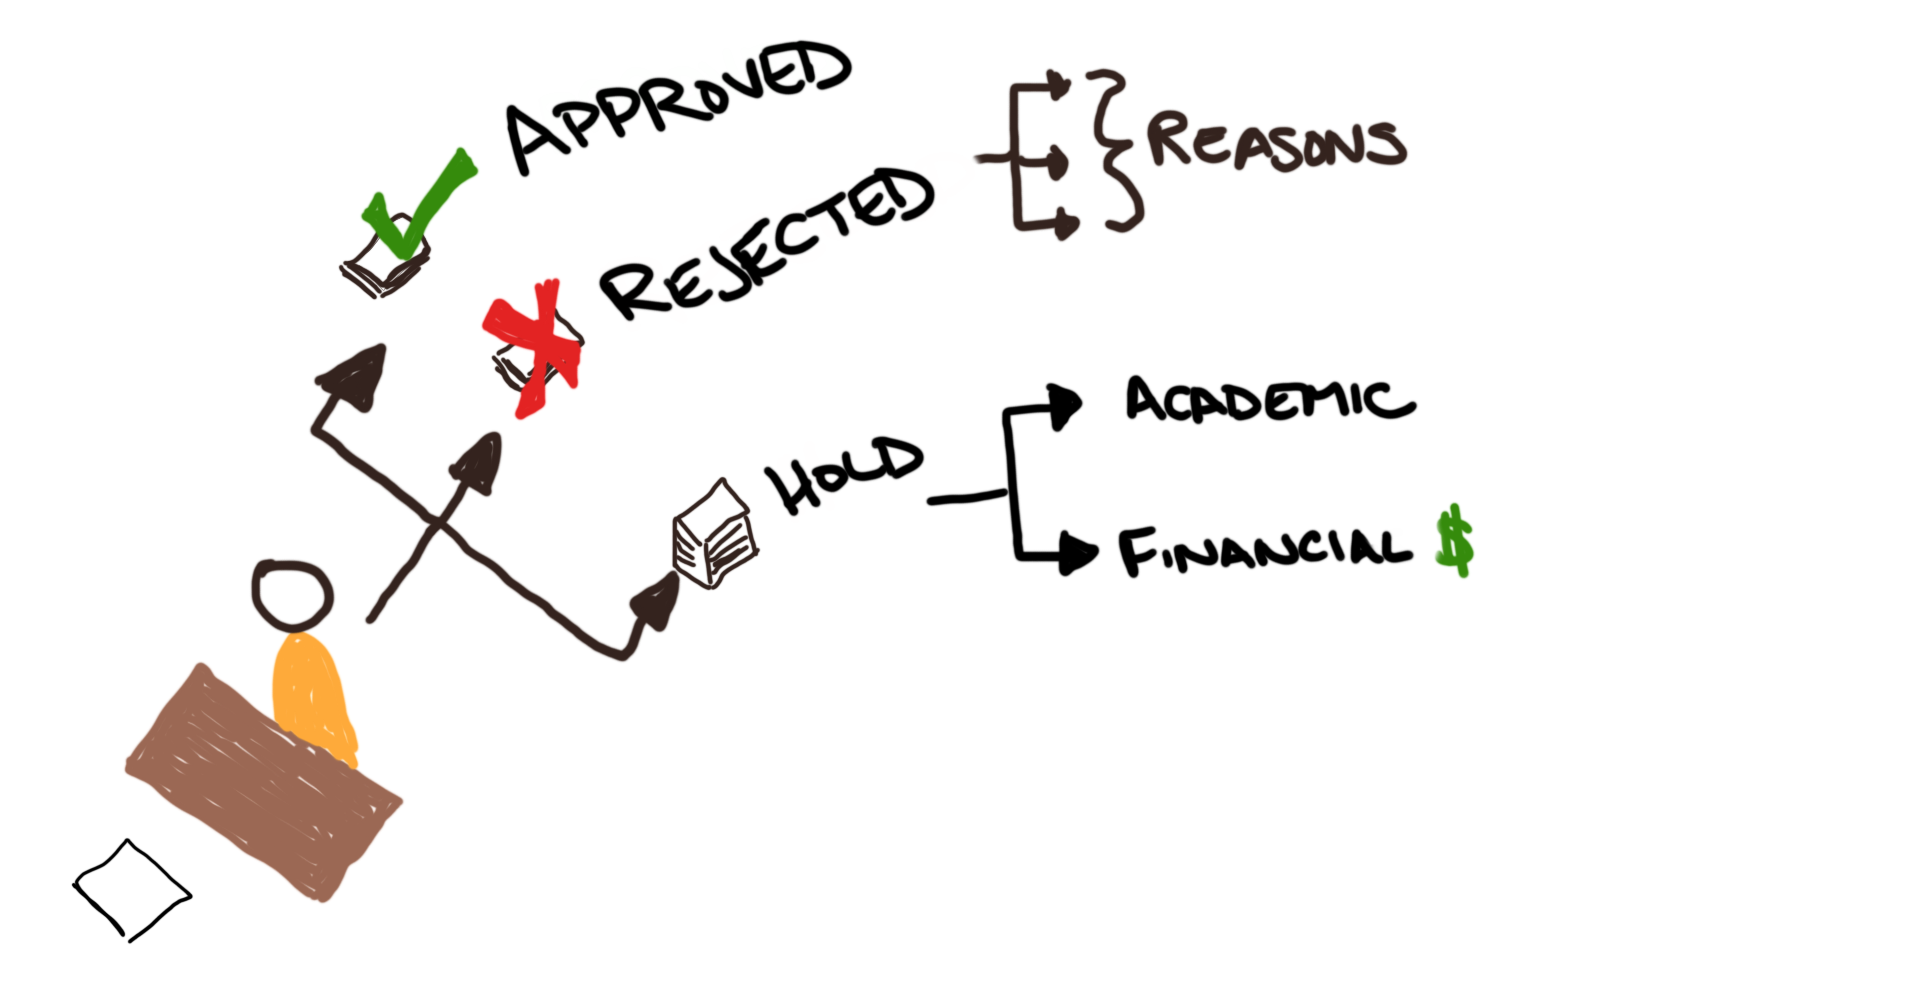 a diagram of a request coming in to be reviewed and the admin sending it either to approved, rejected, or hold piles; but hold has another fork for reasons and hold can be for academic or financial reasons